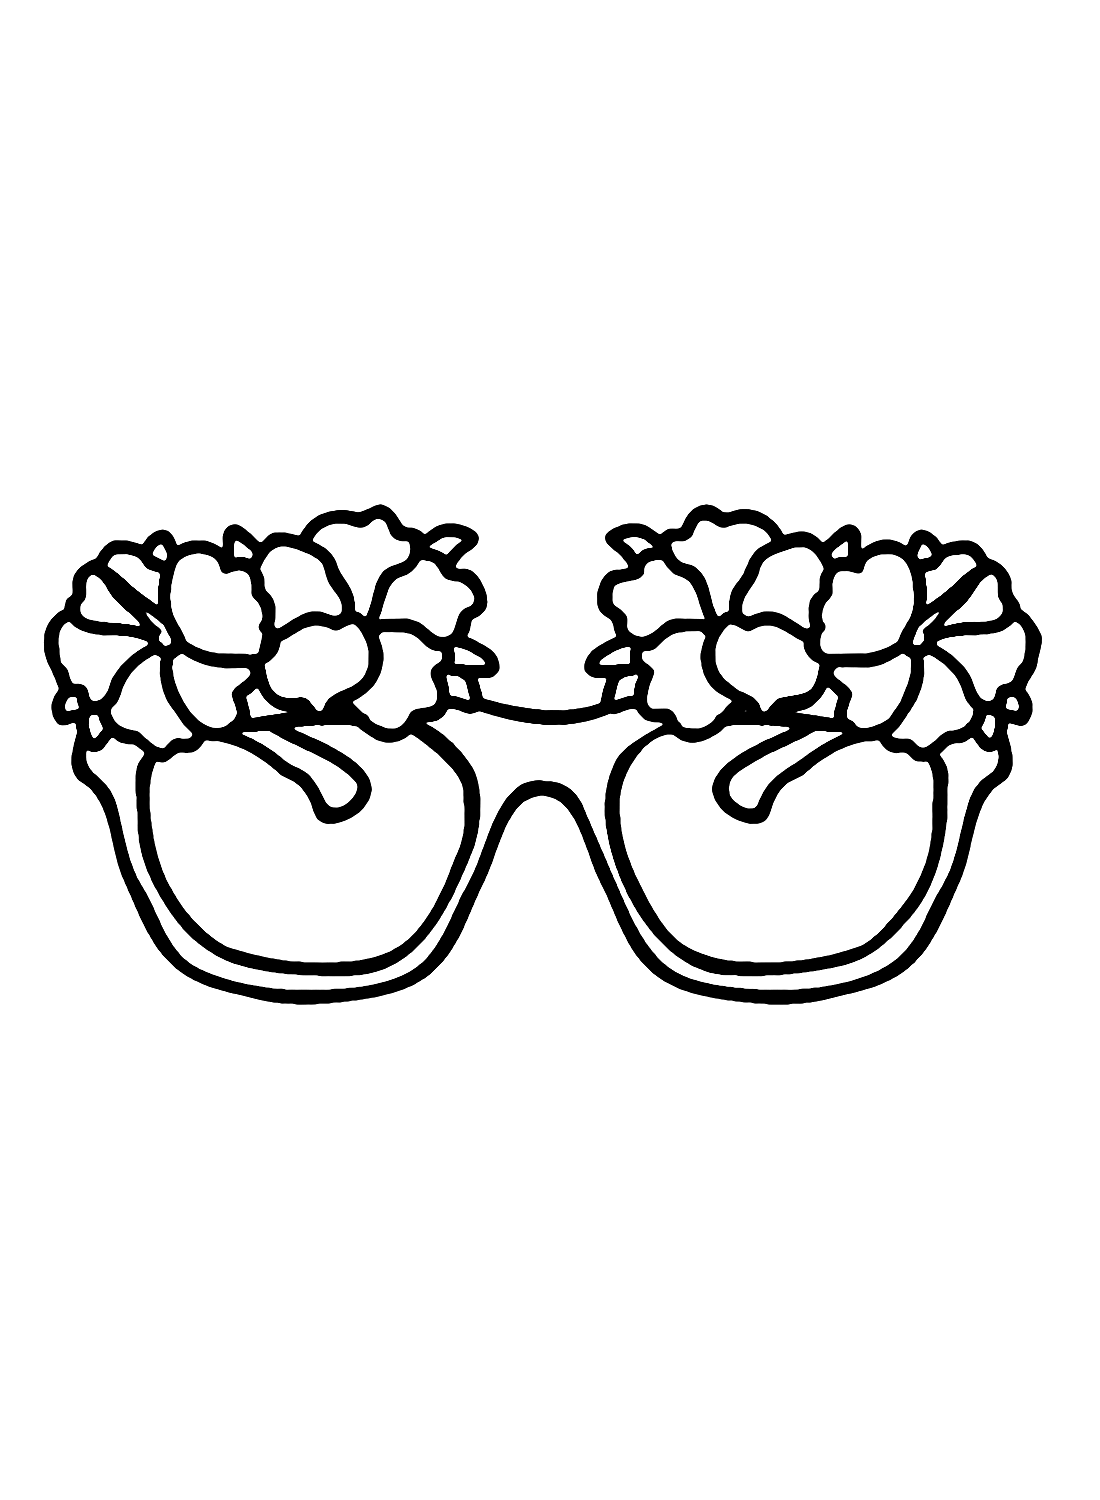 Fancy Sunglasses Coloring Page